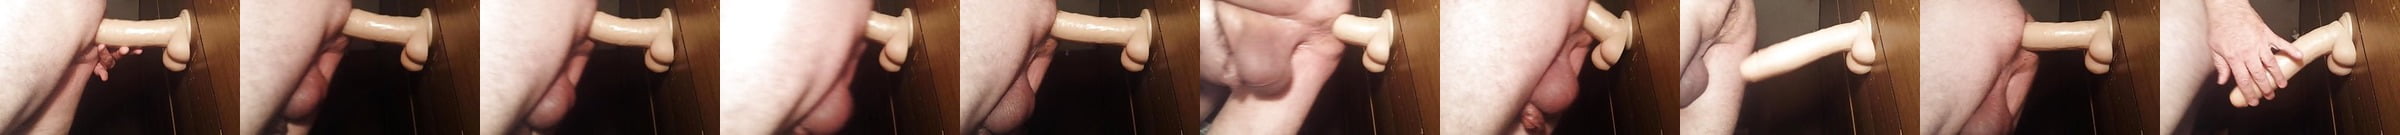 Mature Bears Assfucking During Orgy Gay Porn 72 Xhamster